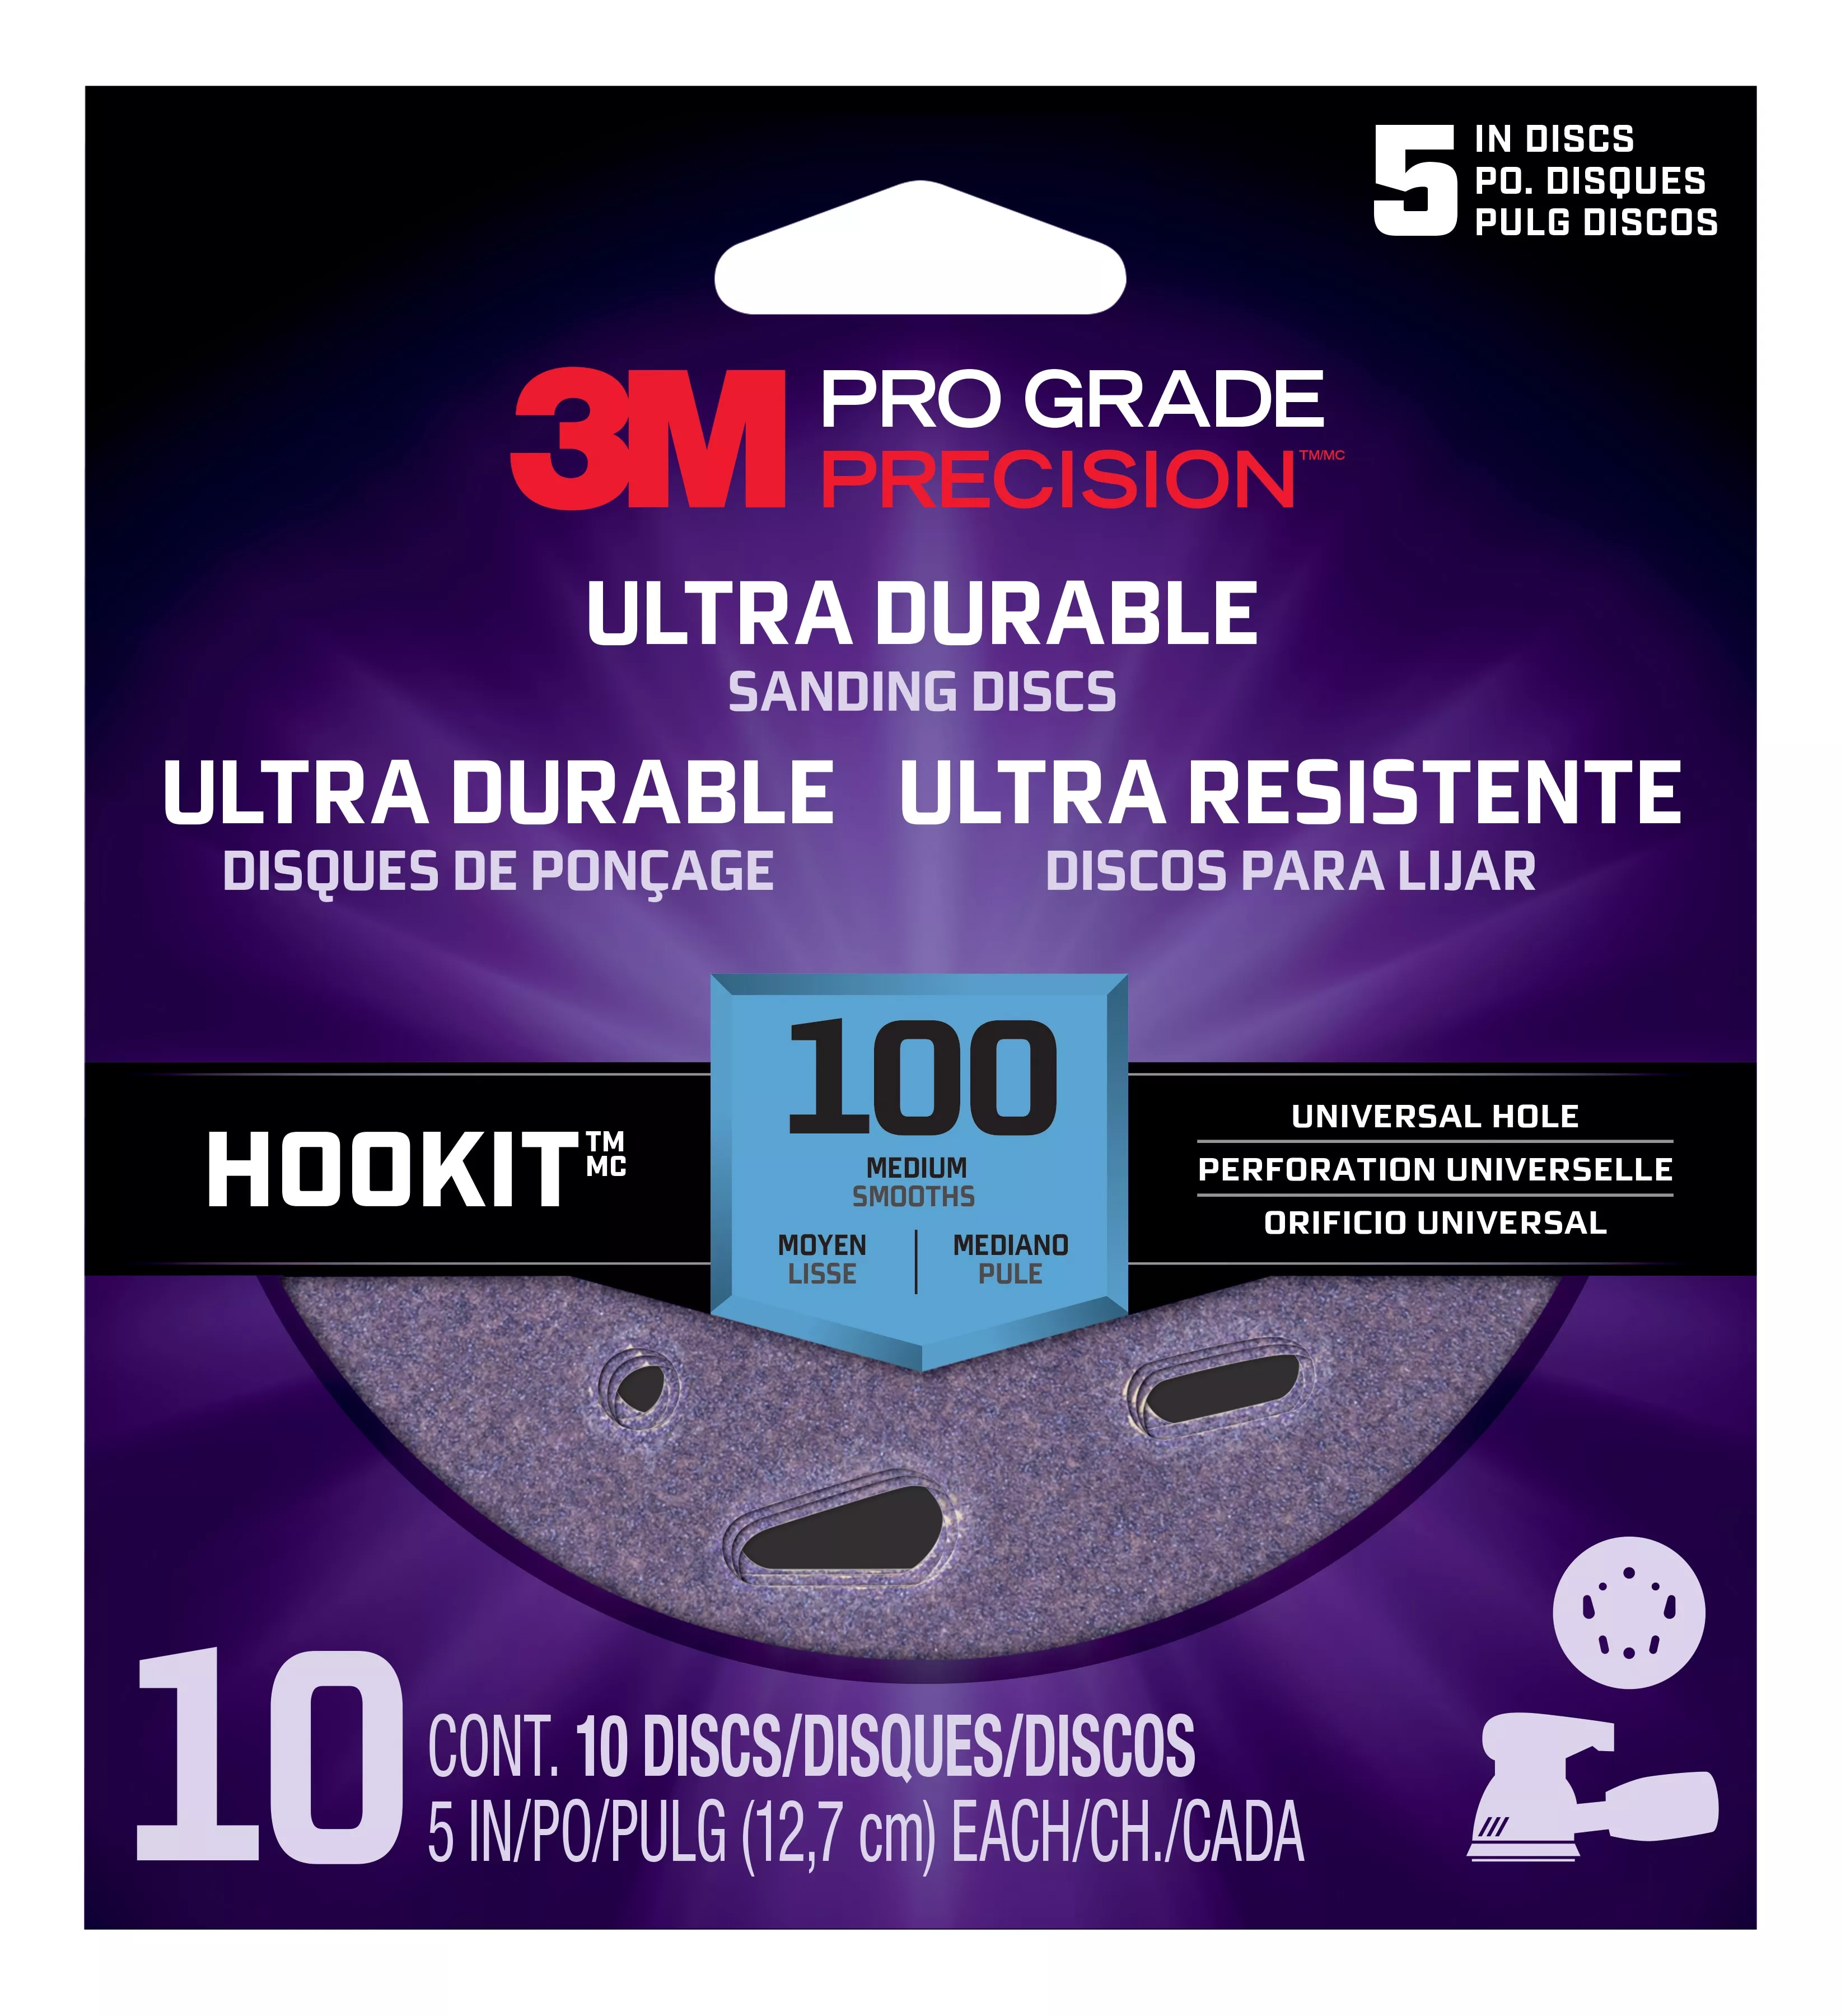 3M™ Pro Grade Precision™ Ultra Durable Universal Hole Sanding Disc,
DUH5100TRI-10T, 5 IN x UH, 100, 10 pack